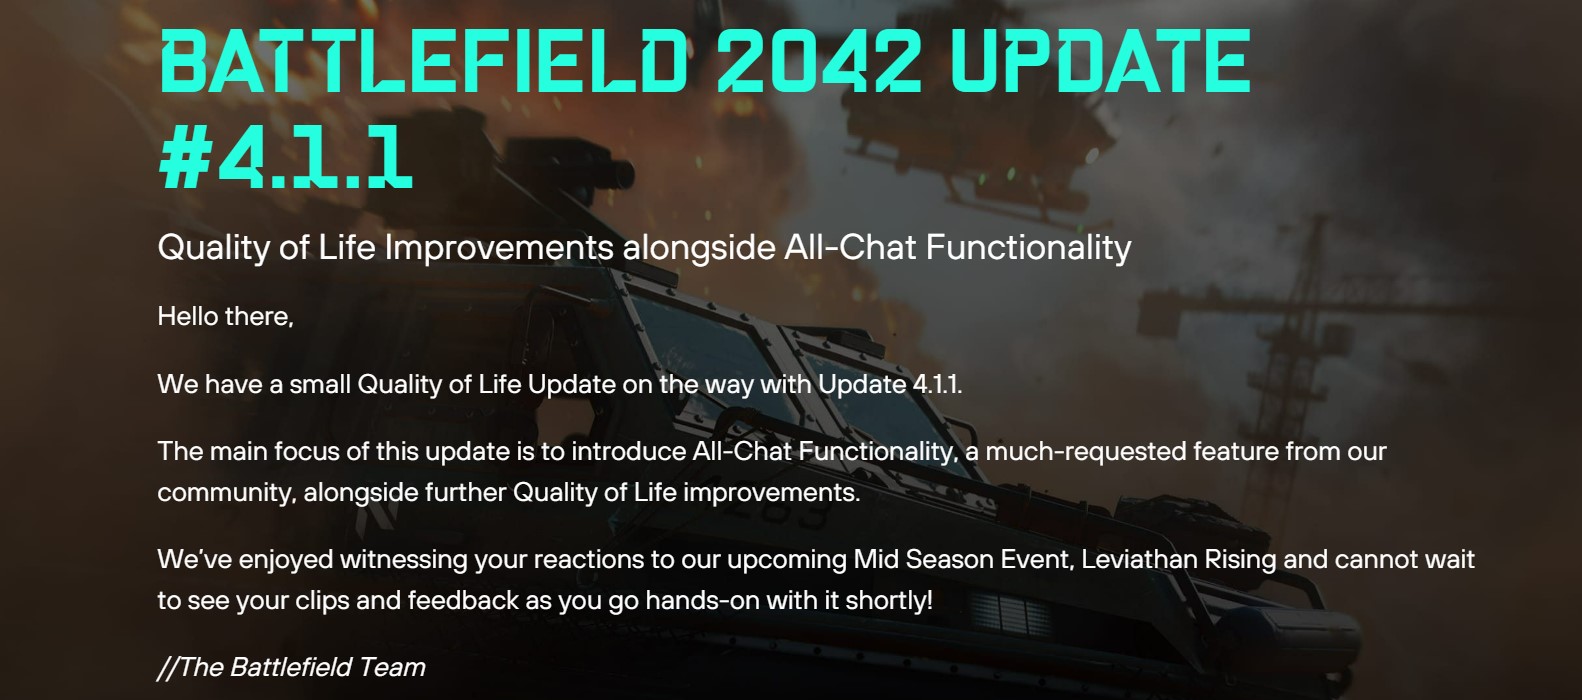 Battlefield 2042 patch notes